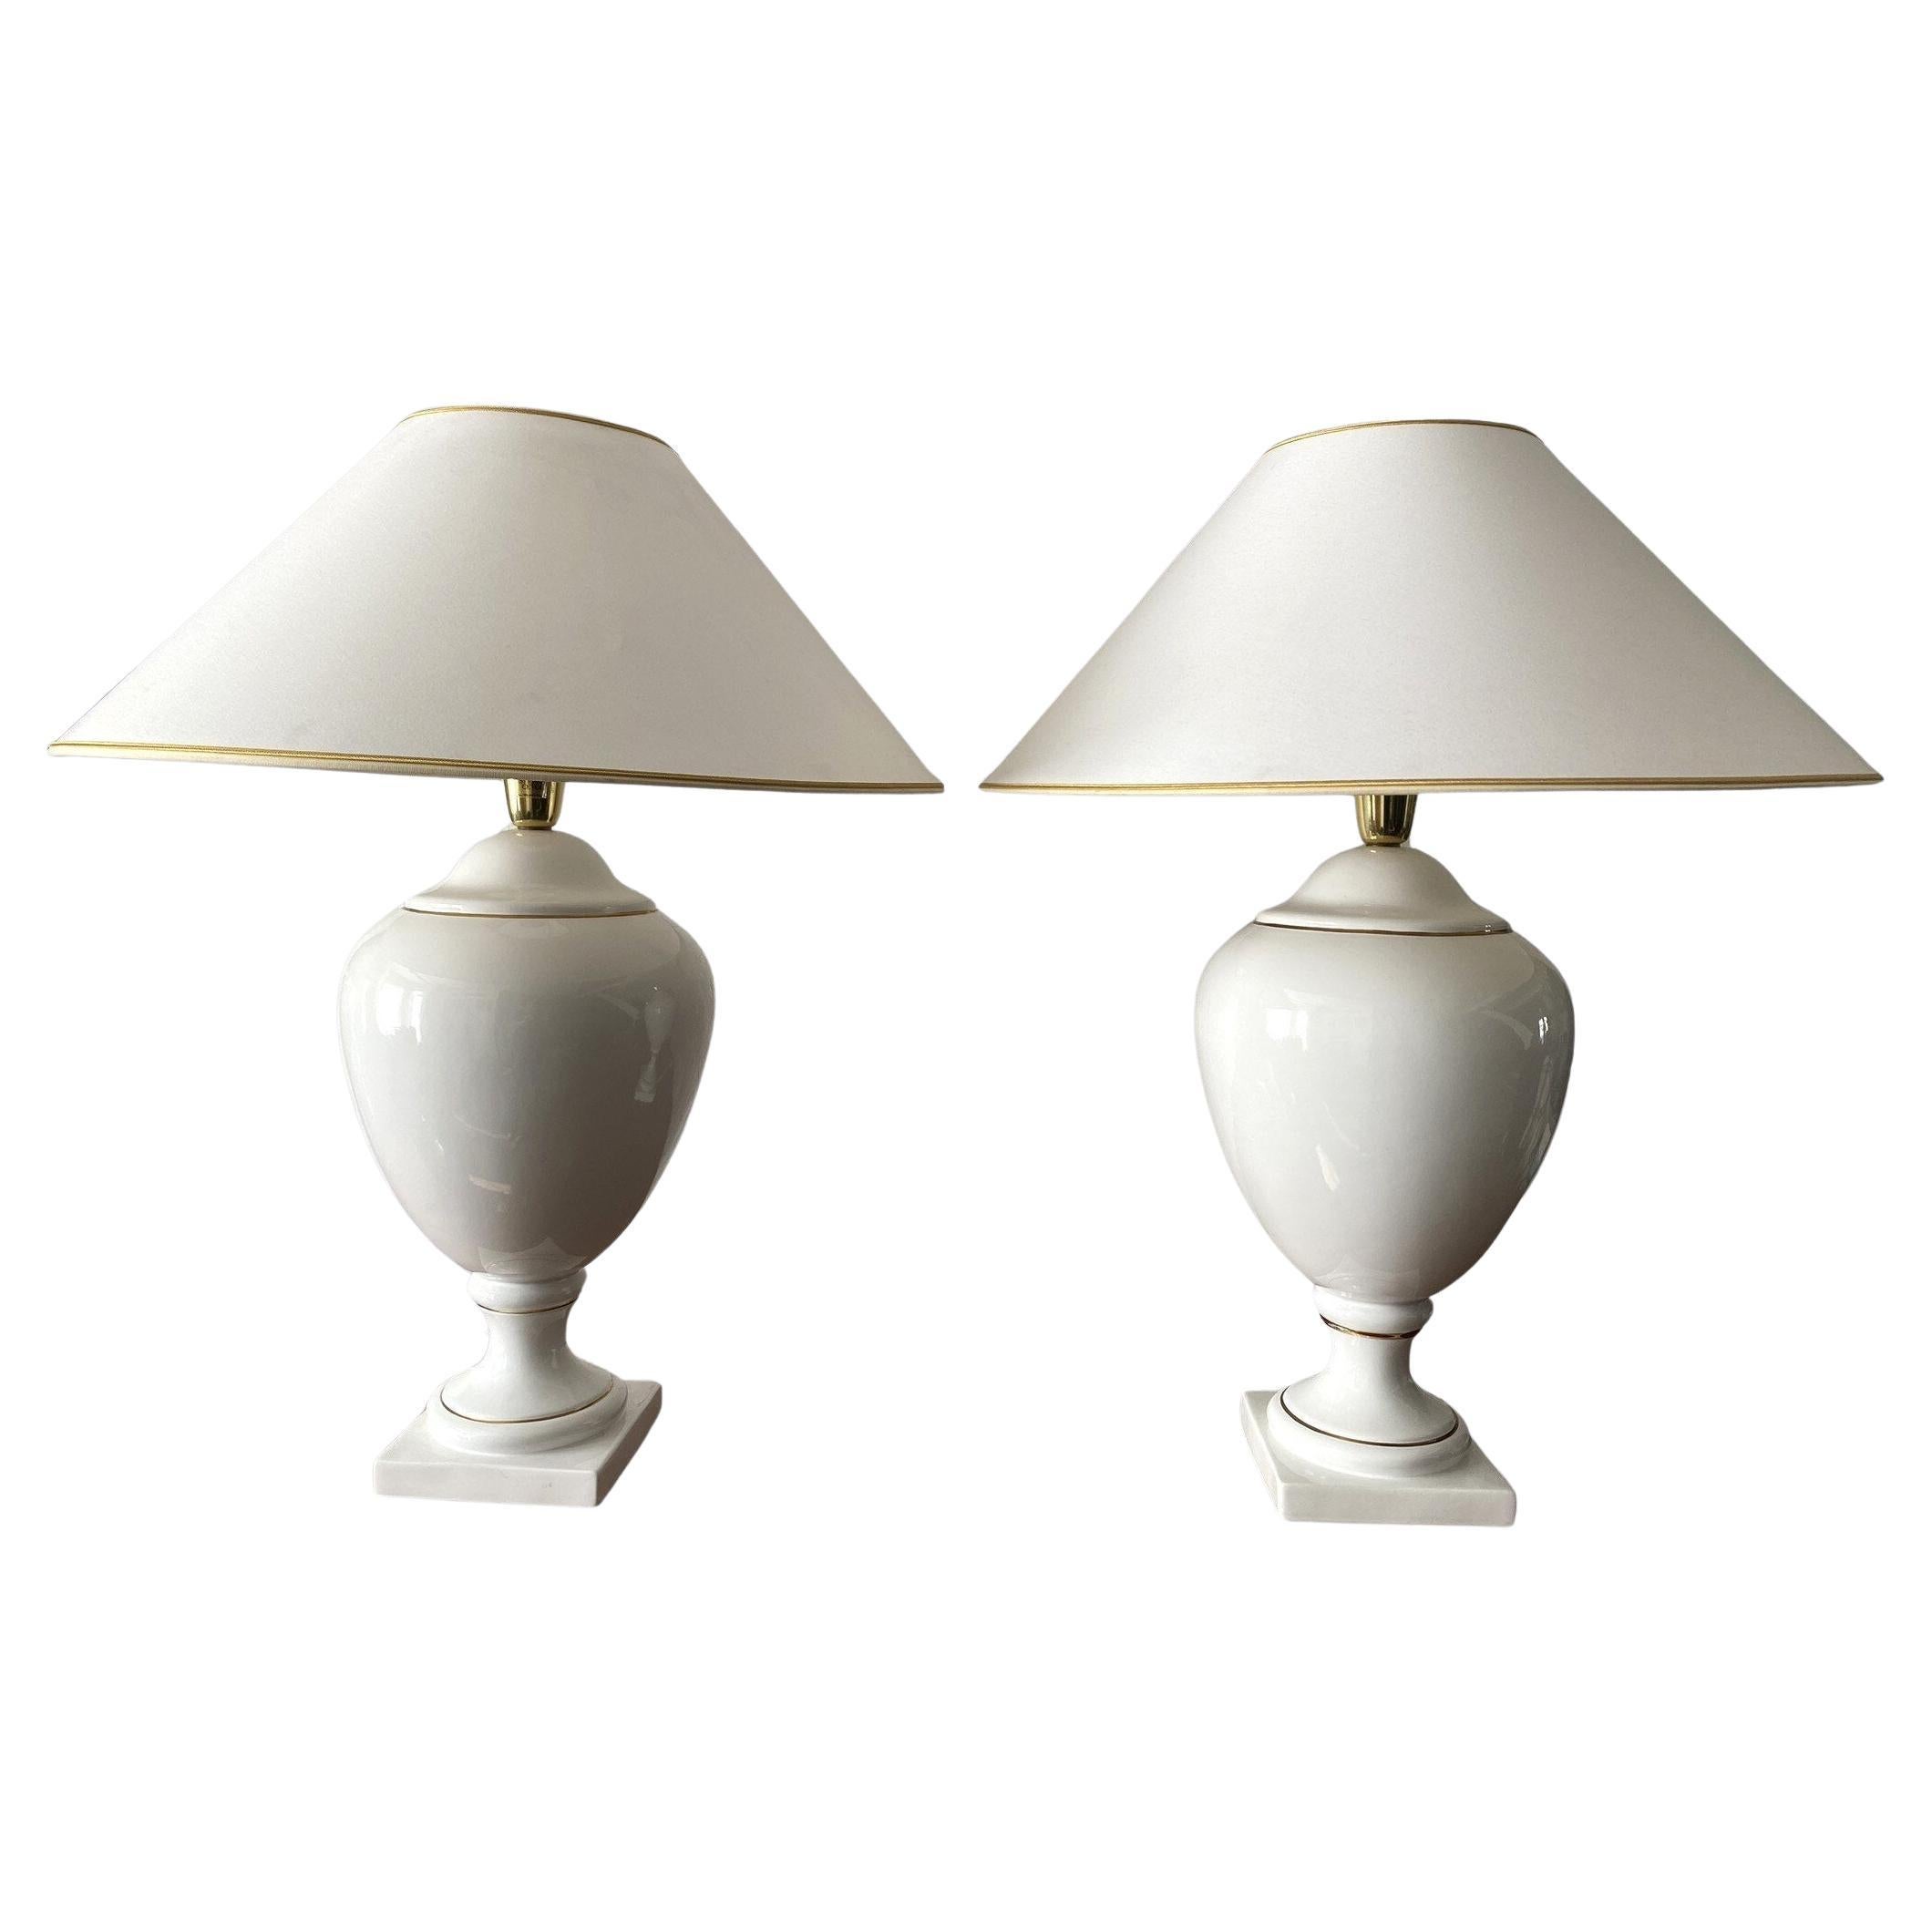 Pair of White & Gold Ceramic Table Lamps & Shades by Stefano Cevoli, 1980s For Sale